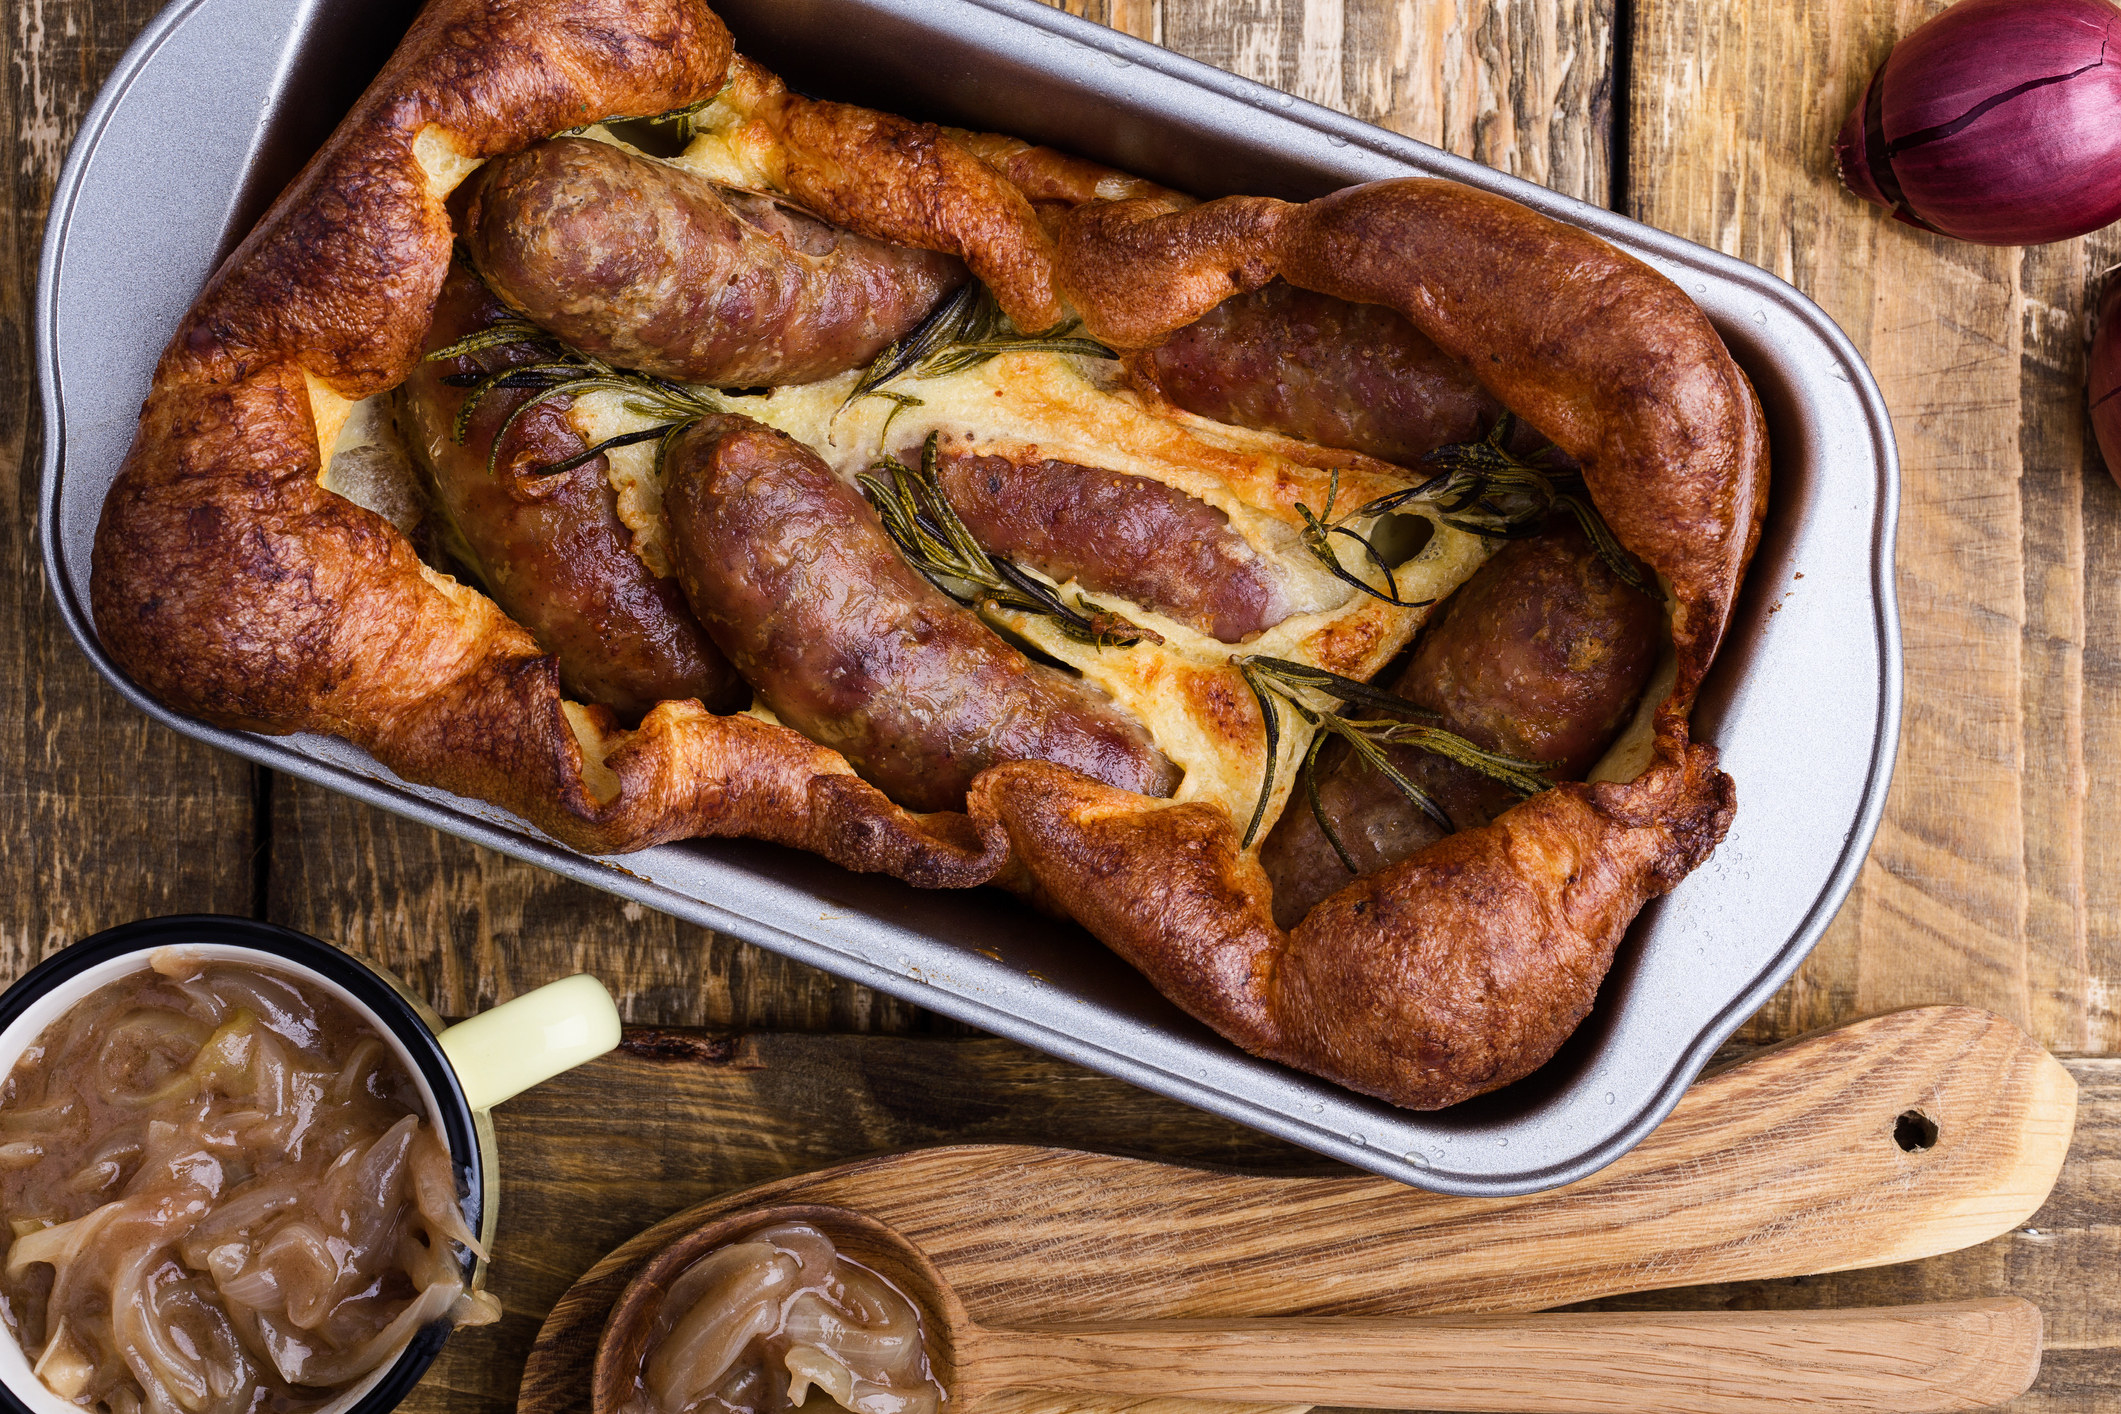 Sausages in a Yorkshire pudding